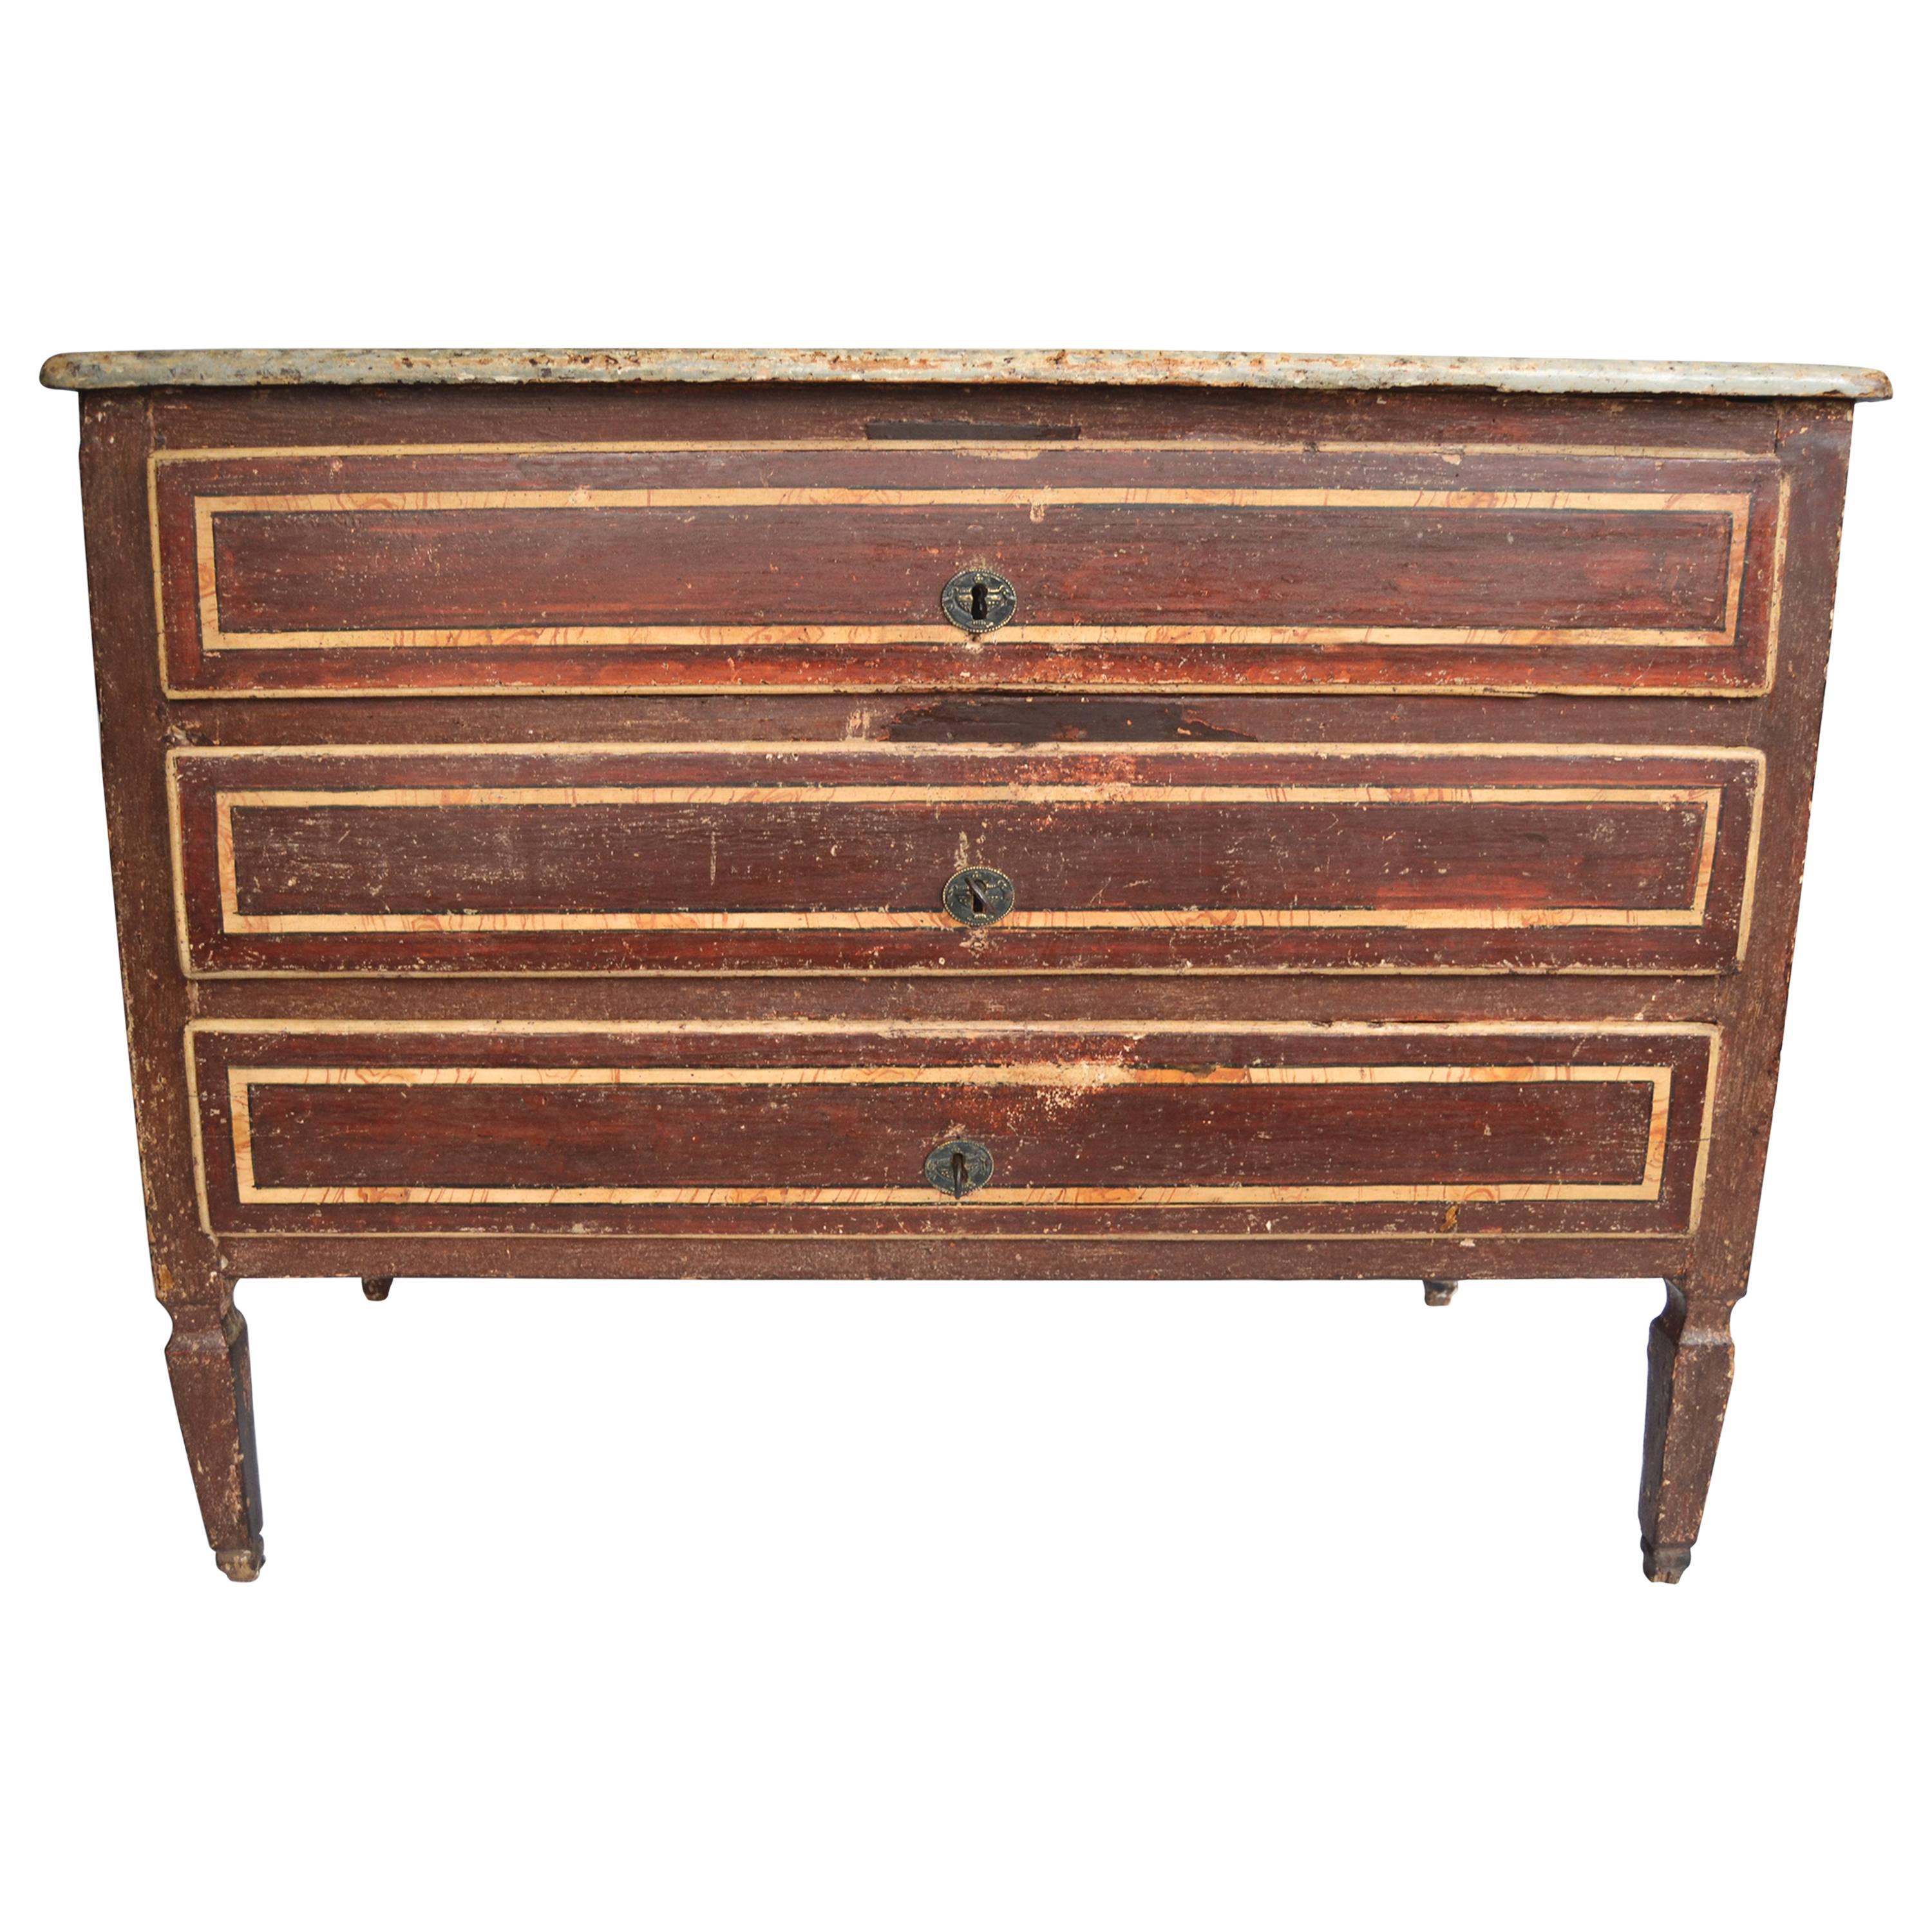 Late 18th Century Italian Neoclassical Faux Painted Chest For Sale